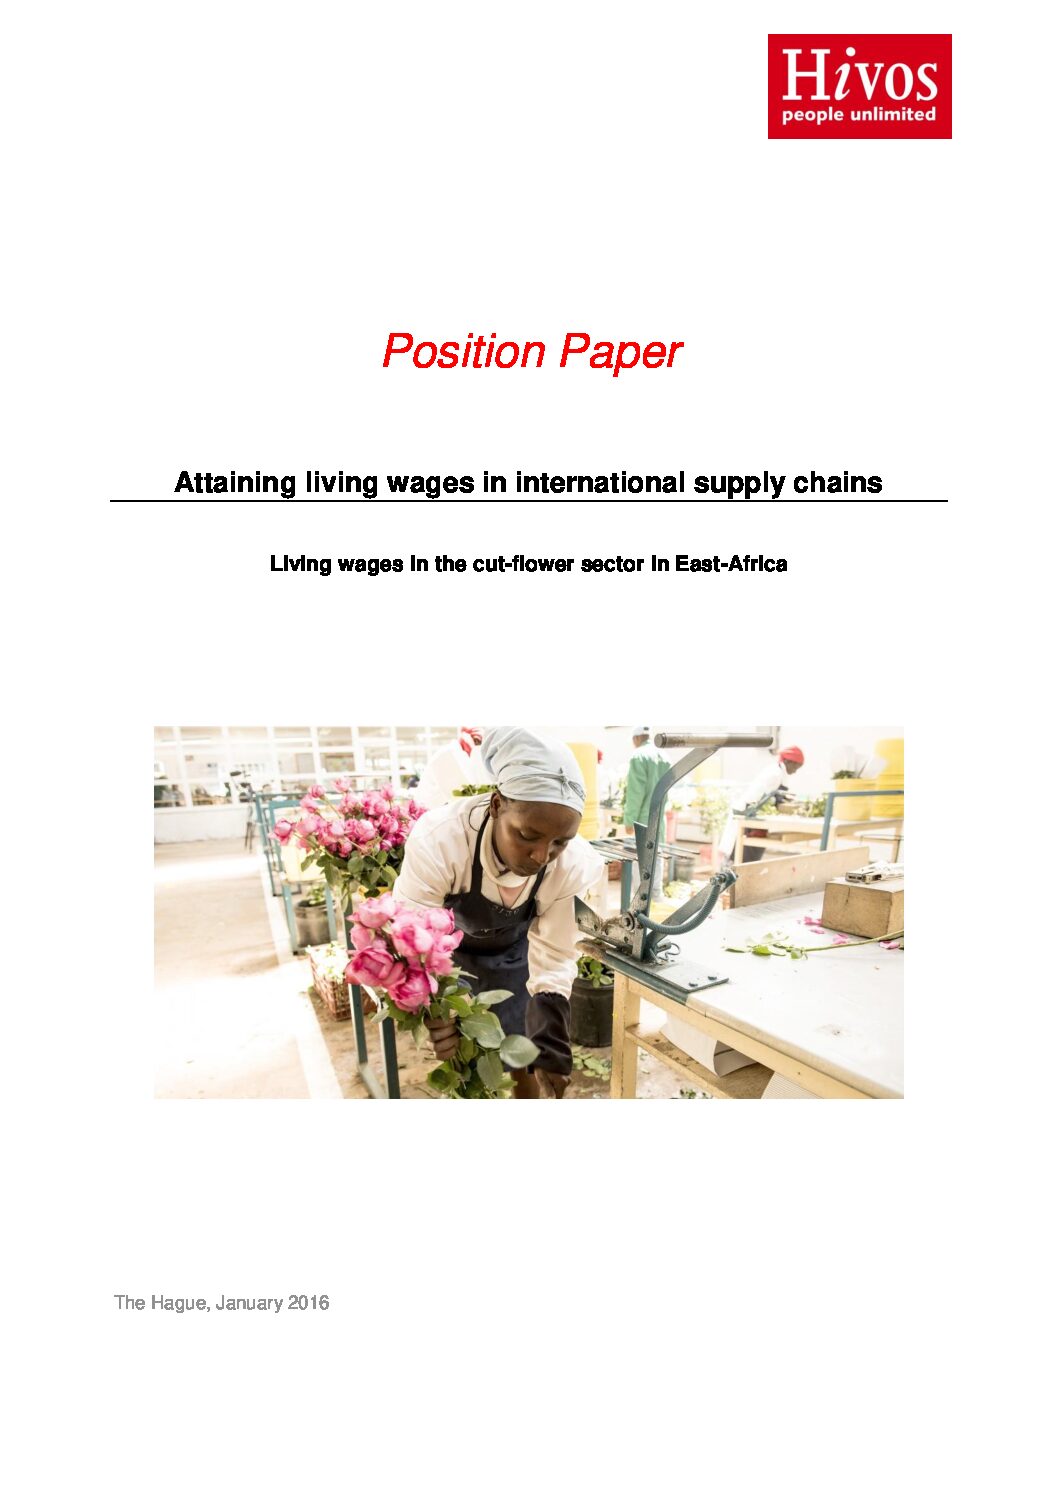 Position paper: Attaining living wages in international supply chains